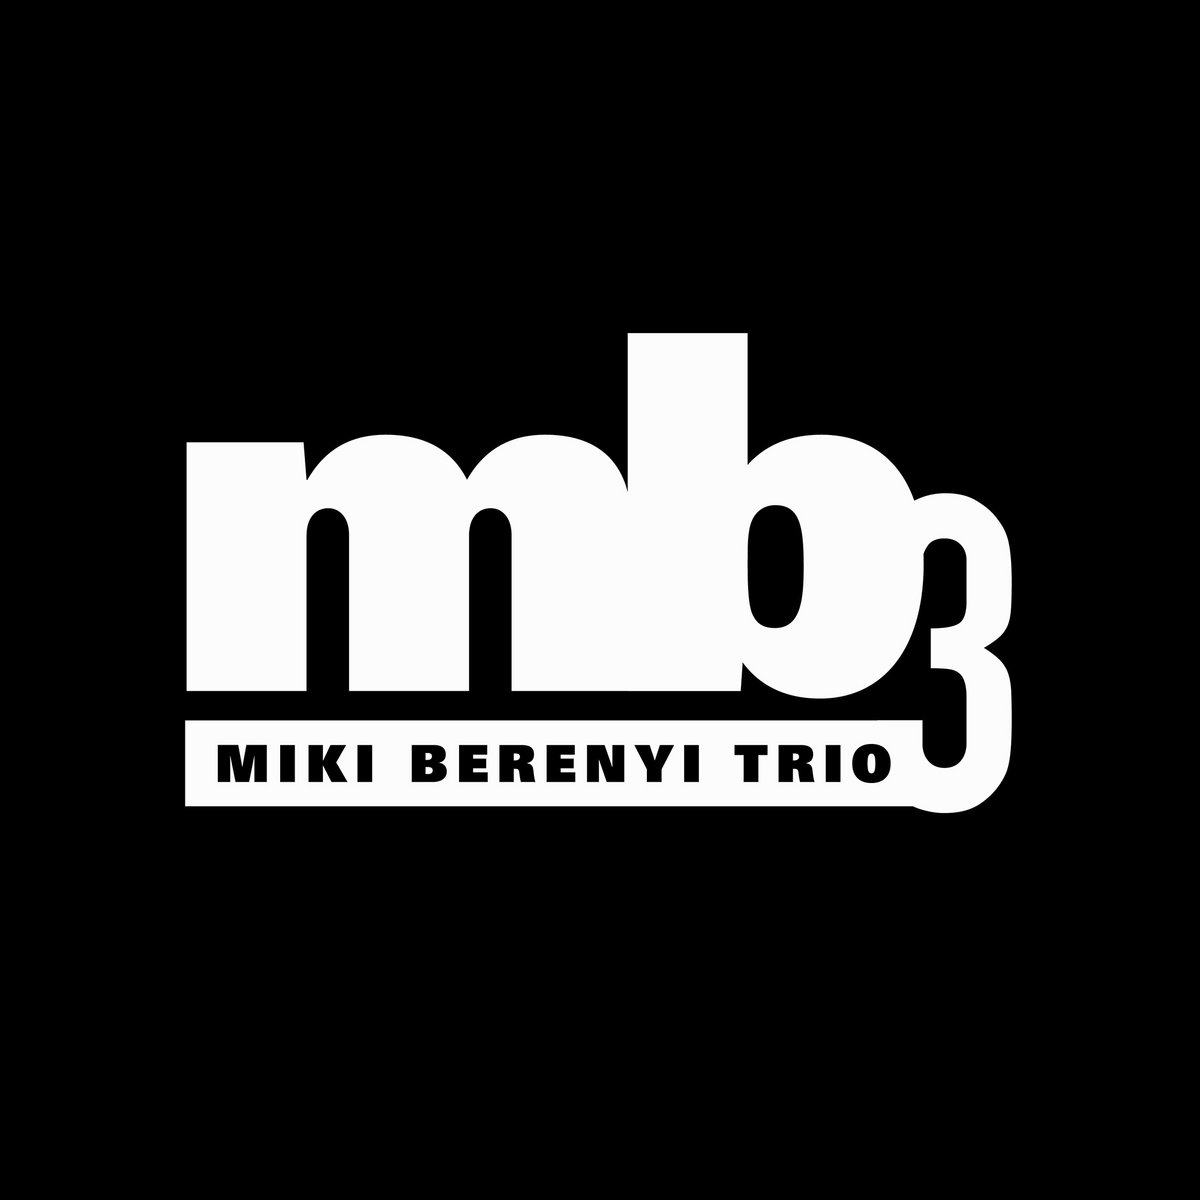 News – Miki Berenyi Trio – Light From A Dead Star (Lush Cover)